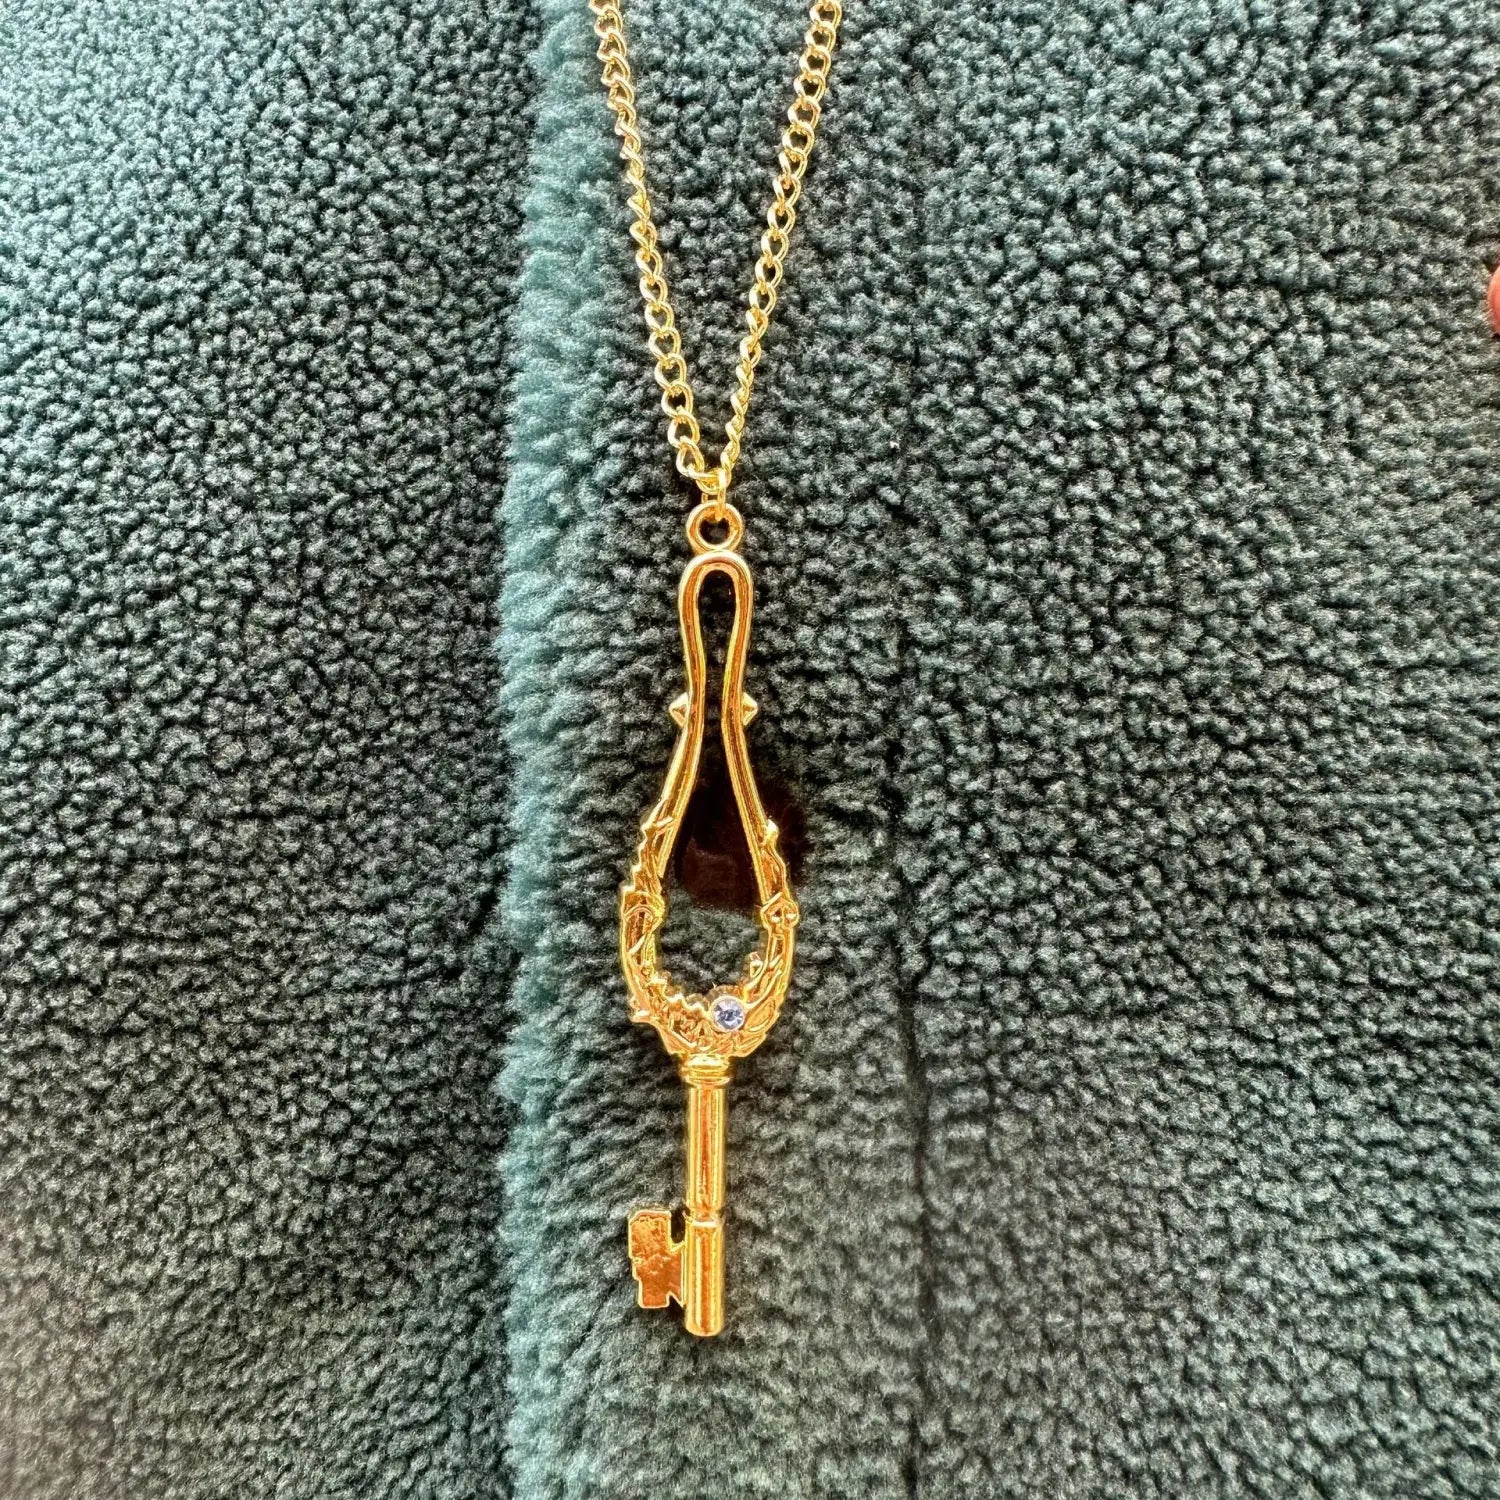 Key Collarbone Chain Necklace